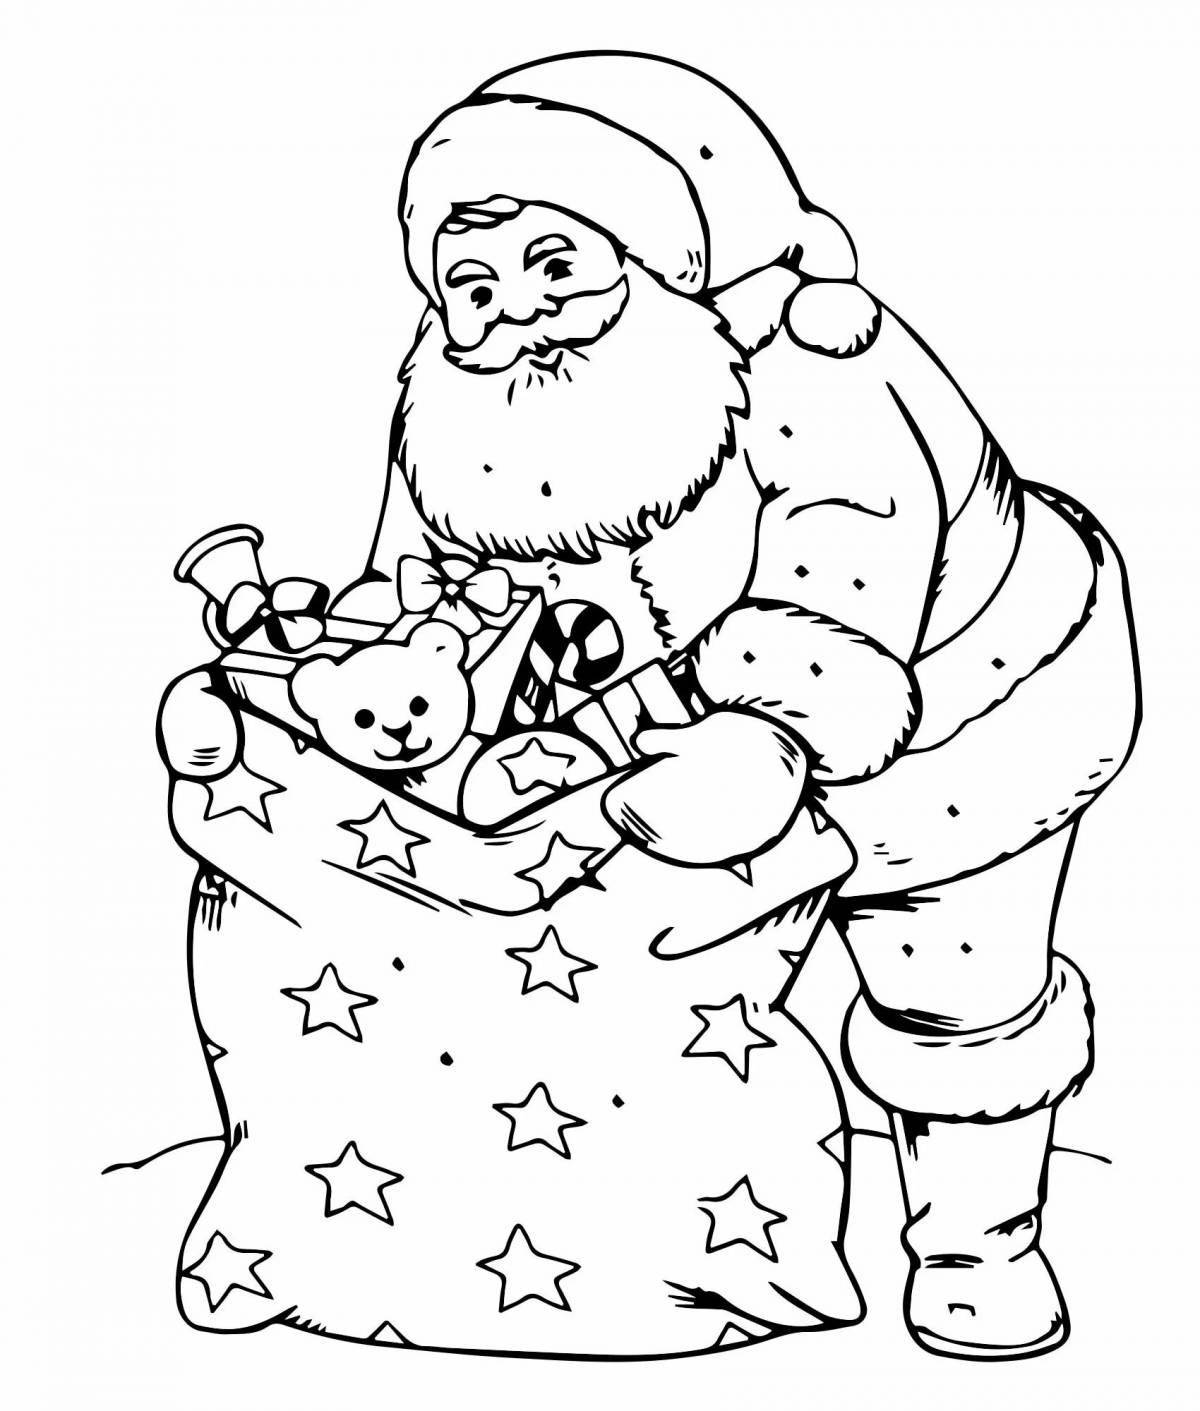 Delightful frost coloring book for kids